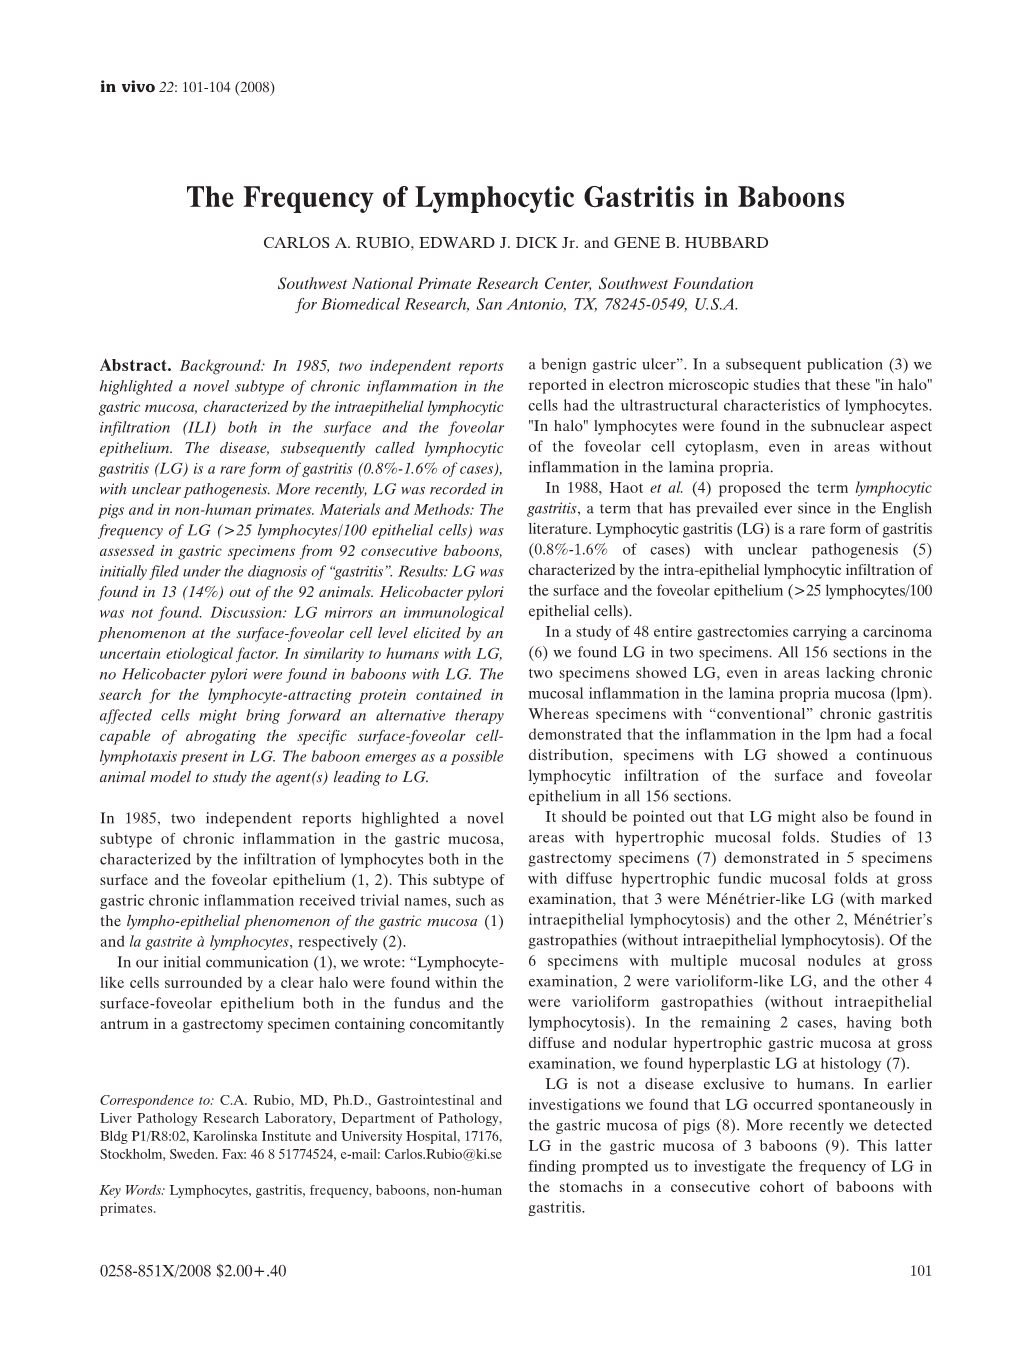 The Frequency of Lymphocytic Gastritis in Baboons